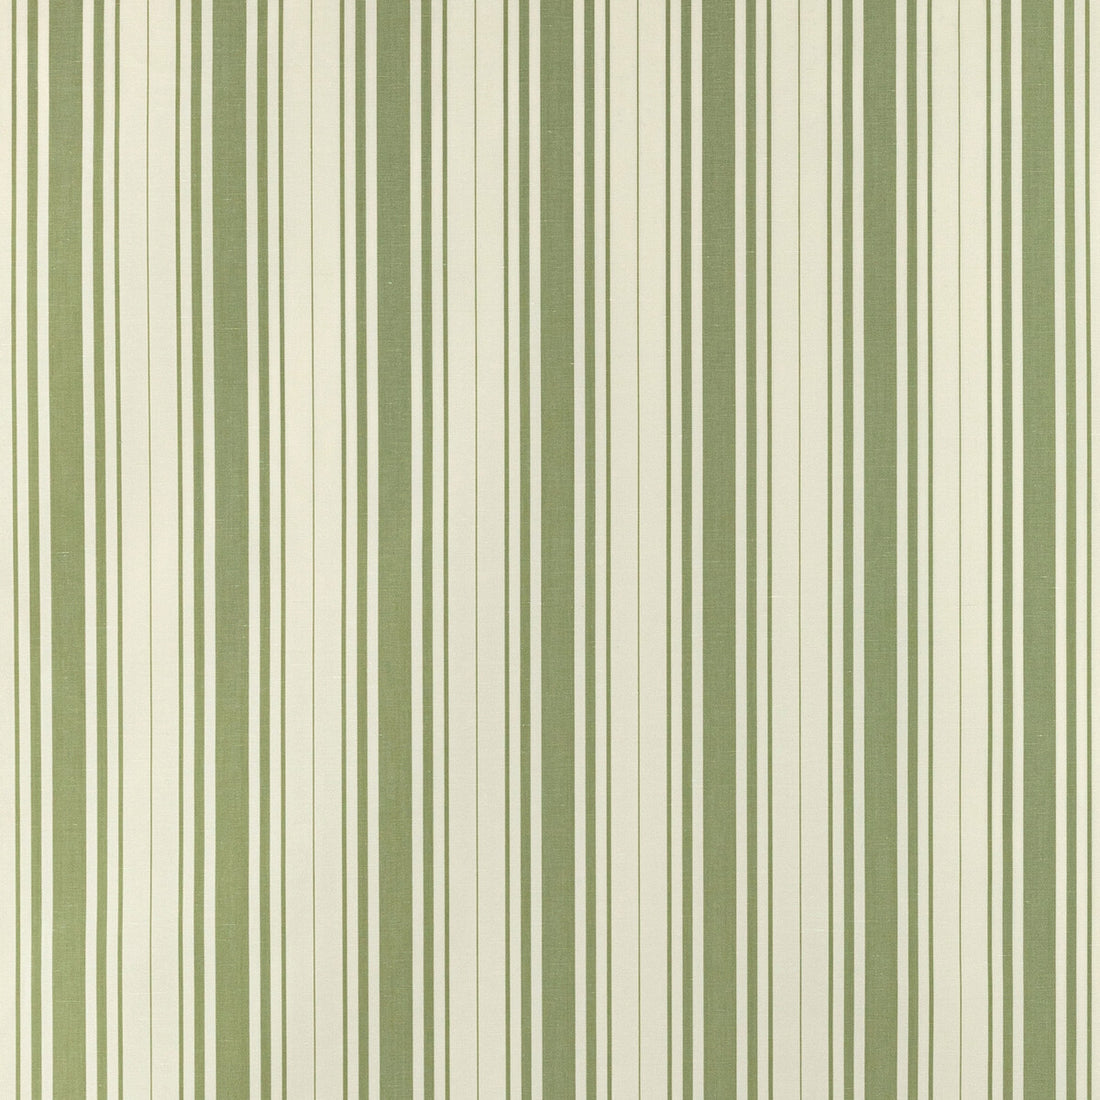 Baldwin Stripe fabric in fern color - pattern 2022100.3.0 - by Lee Jofa in the Sarah Bartholomew collection